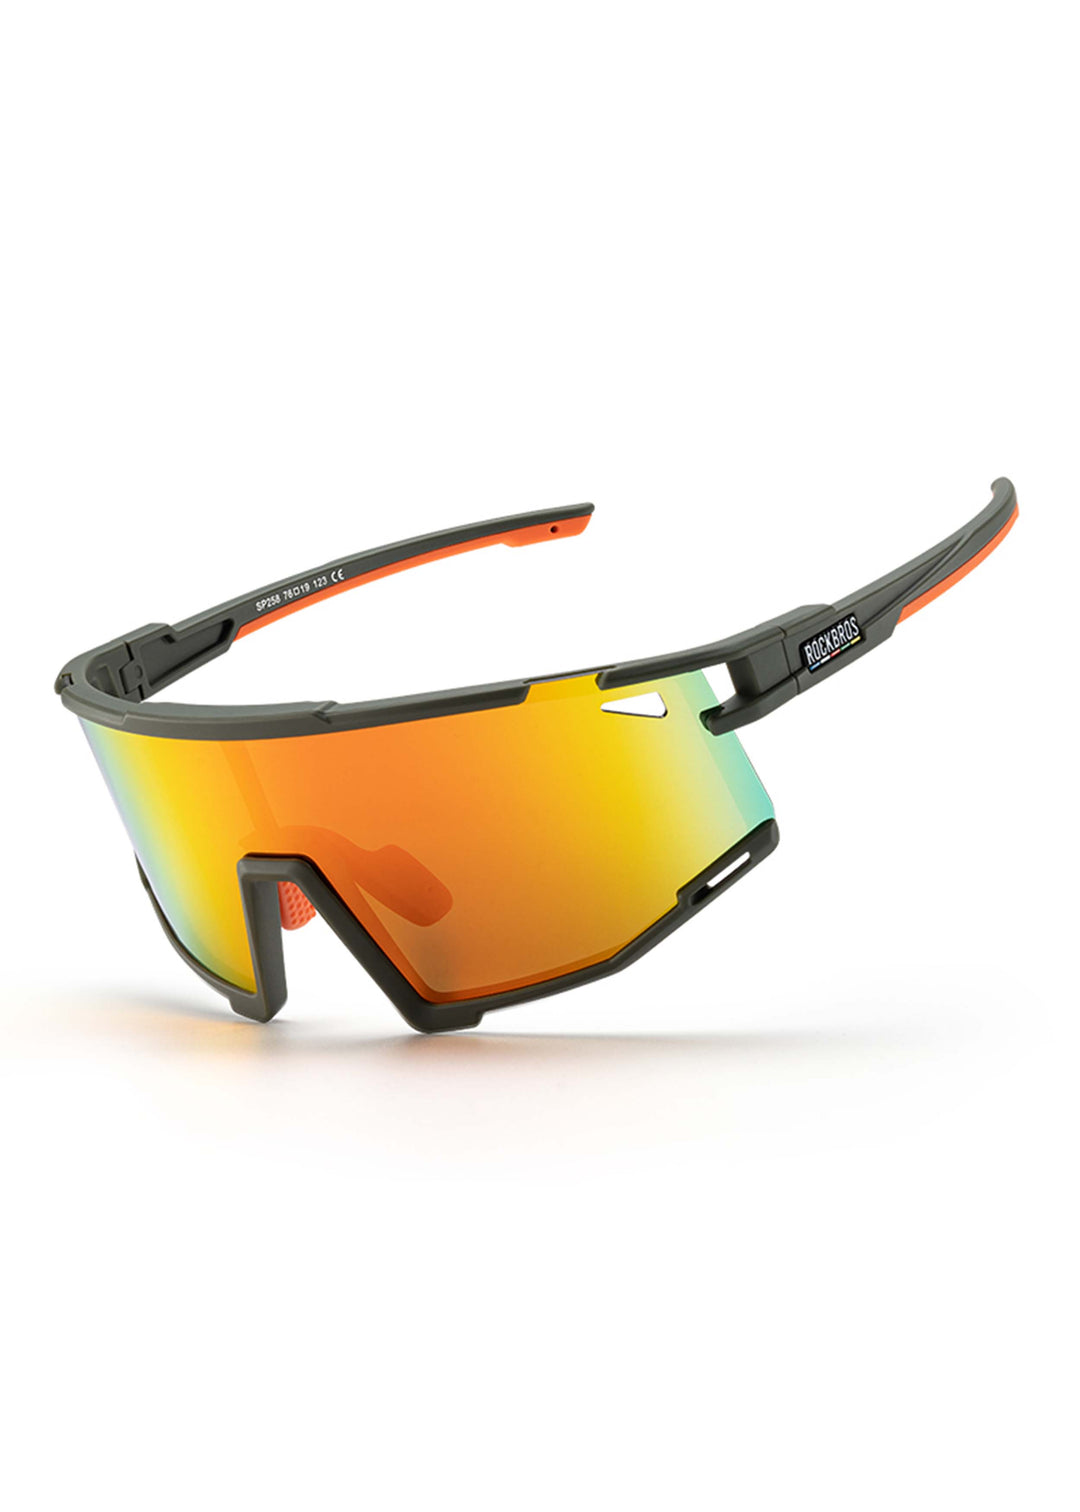 ROAD TO SKY Cycling Glasses Polarized Orange Red